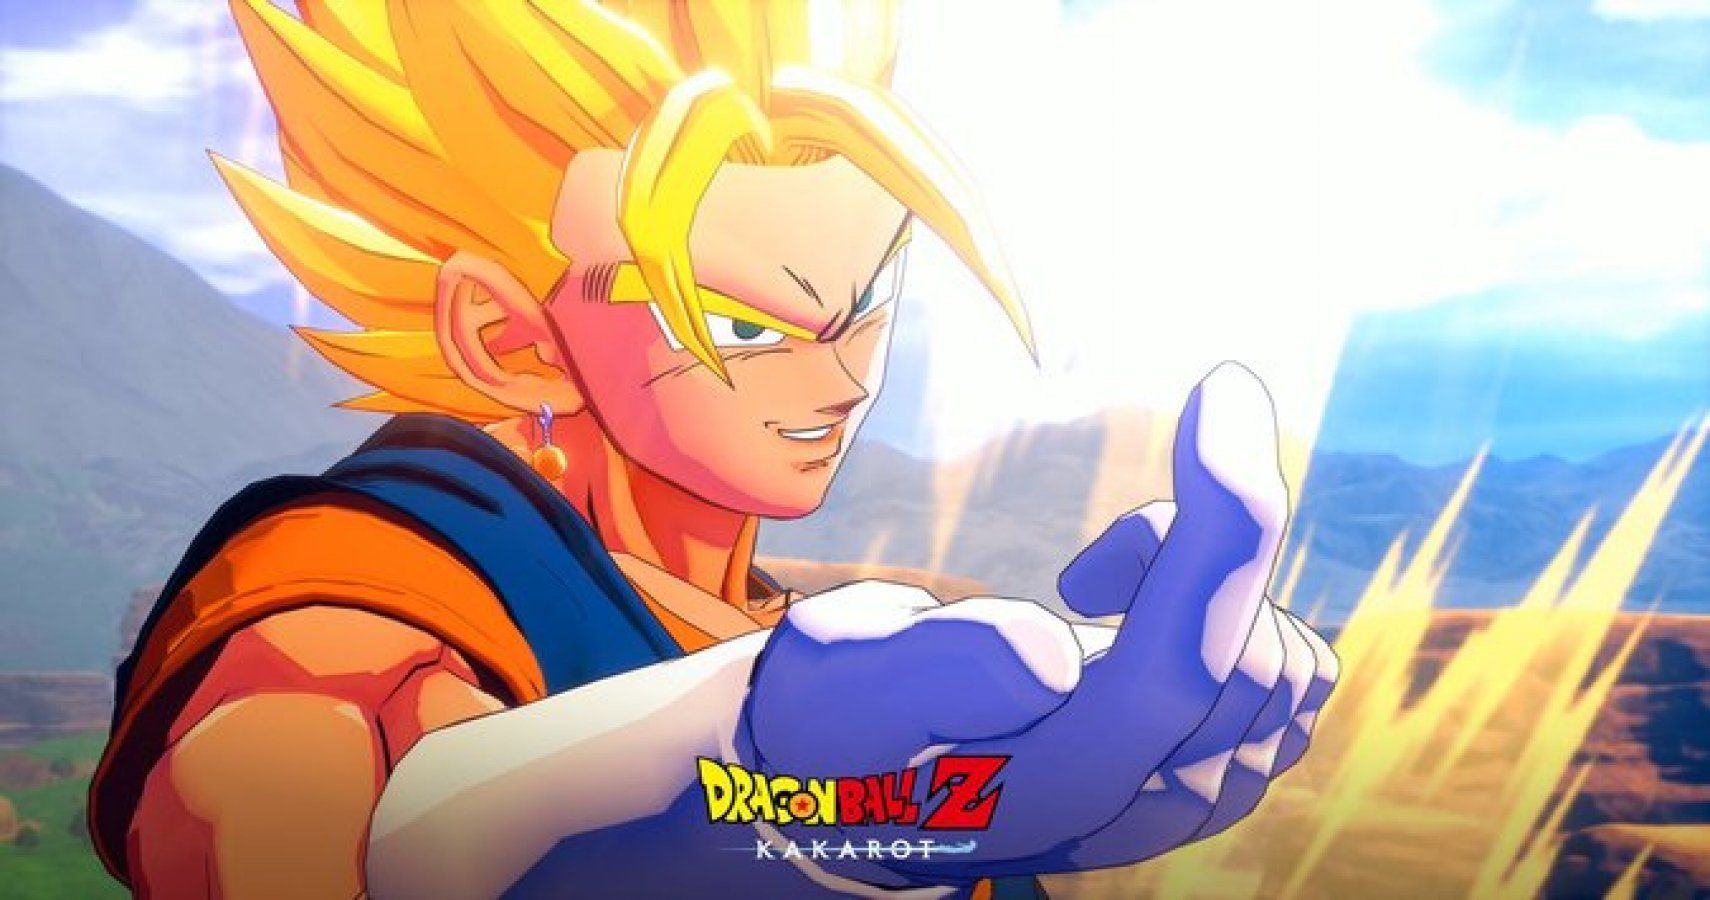 Dragon Ball Z: Kakarot Gives Us Our First Look At Super Vegito